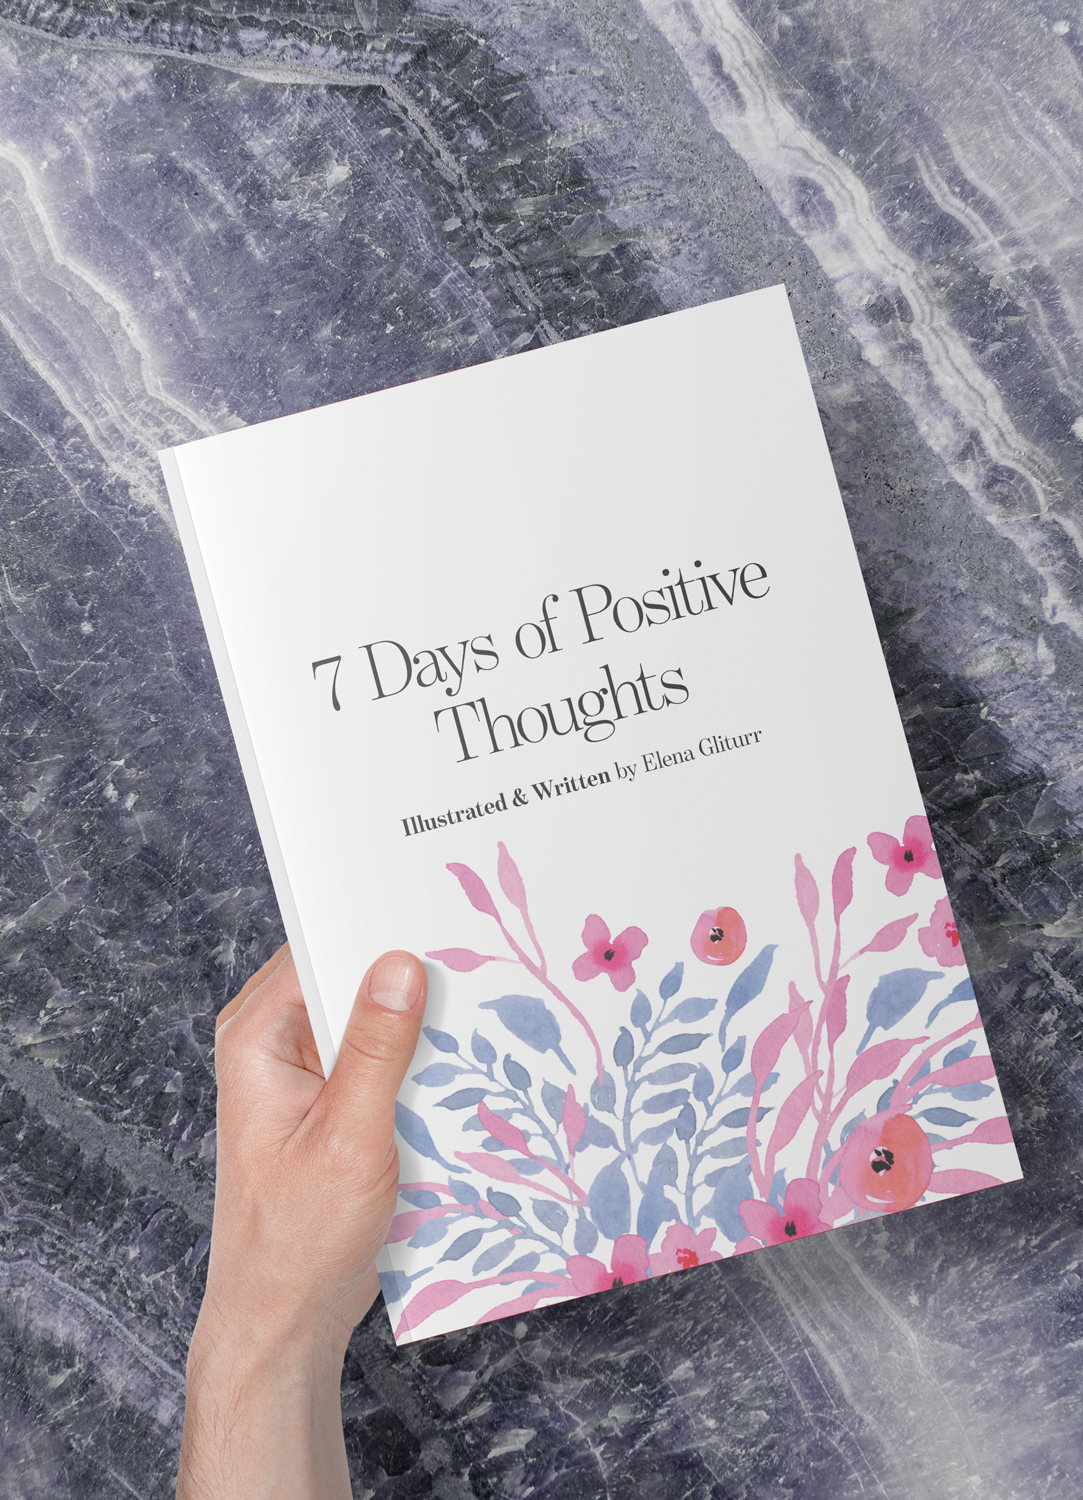 7 Days of Positive Thoughts Manifestation Workbook Inspired by Abraham Hicks